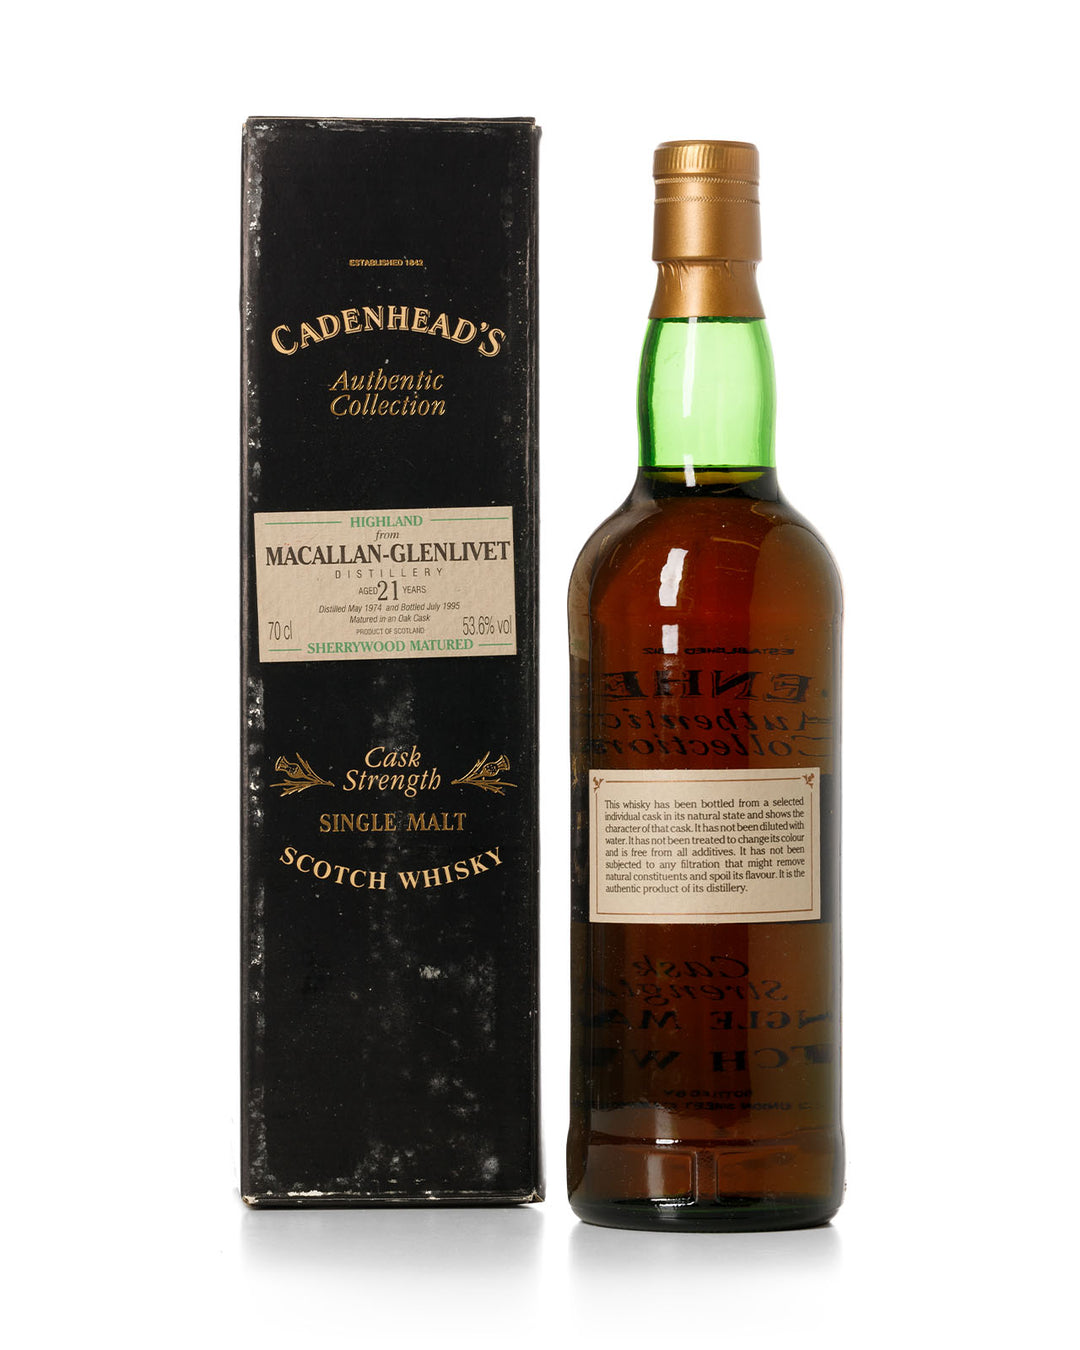 Macallan 1974 21 Year Old Cadenhead's Authentic Collection Bottled in 1995 With Original Box